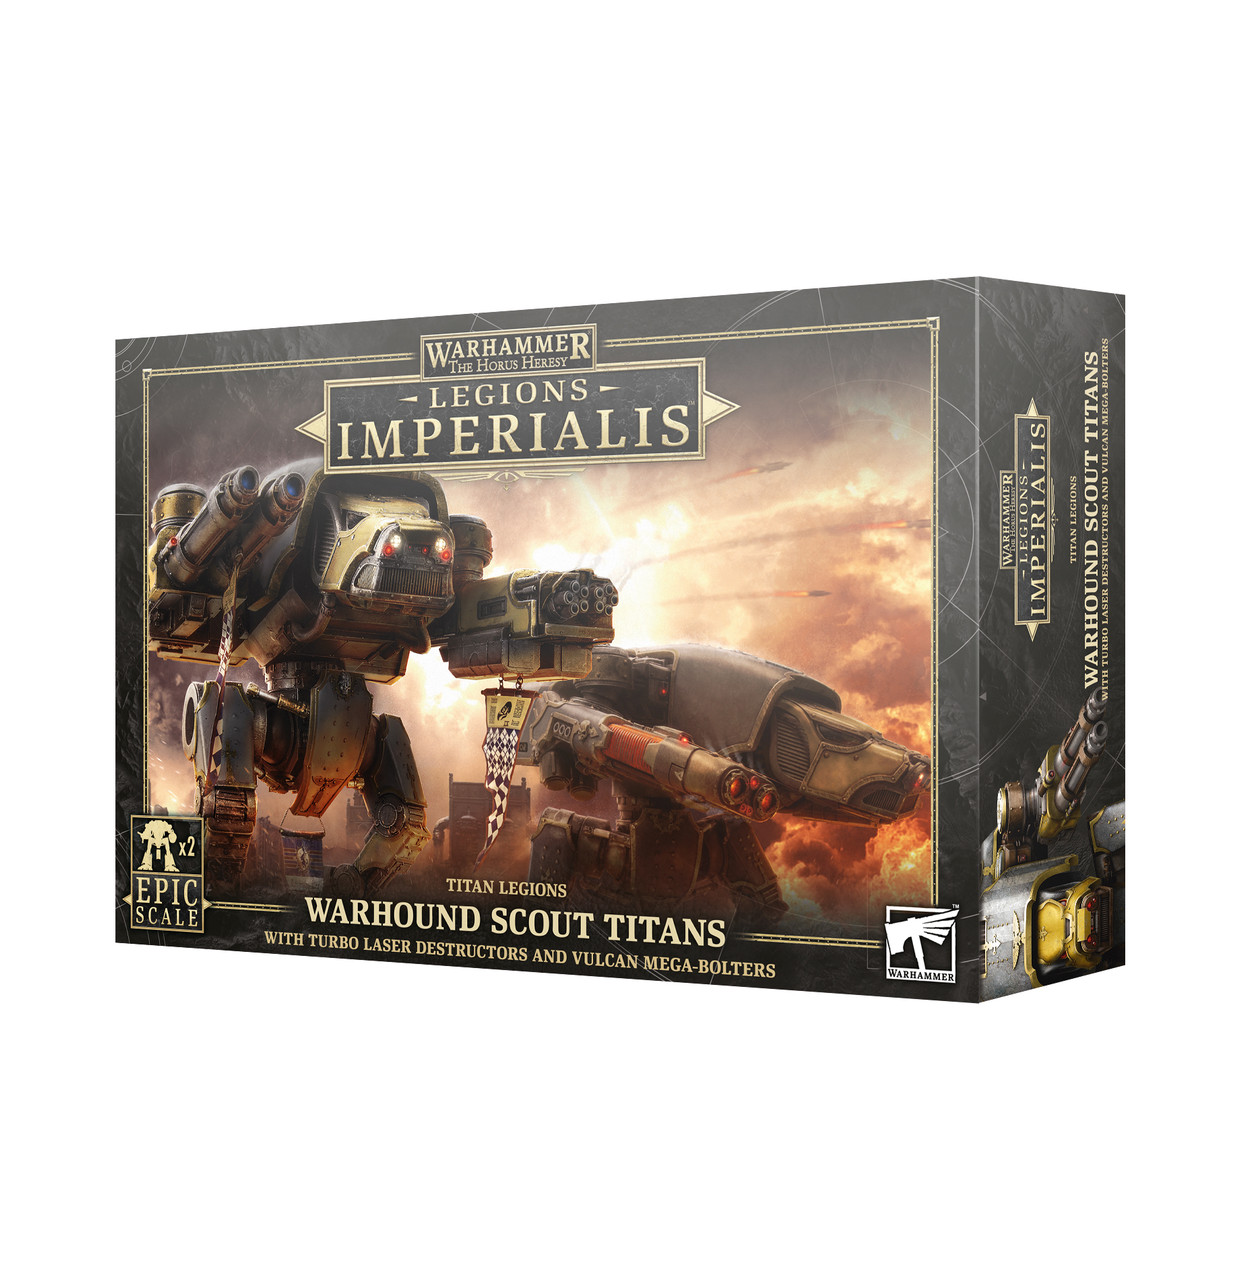 GW03-24 LEGIONS IMPERIALIS: Warhound Scout Titans with Turbo Laster Destructors and Vulcan Mega-Bolters